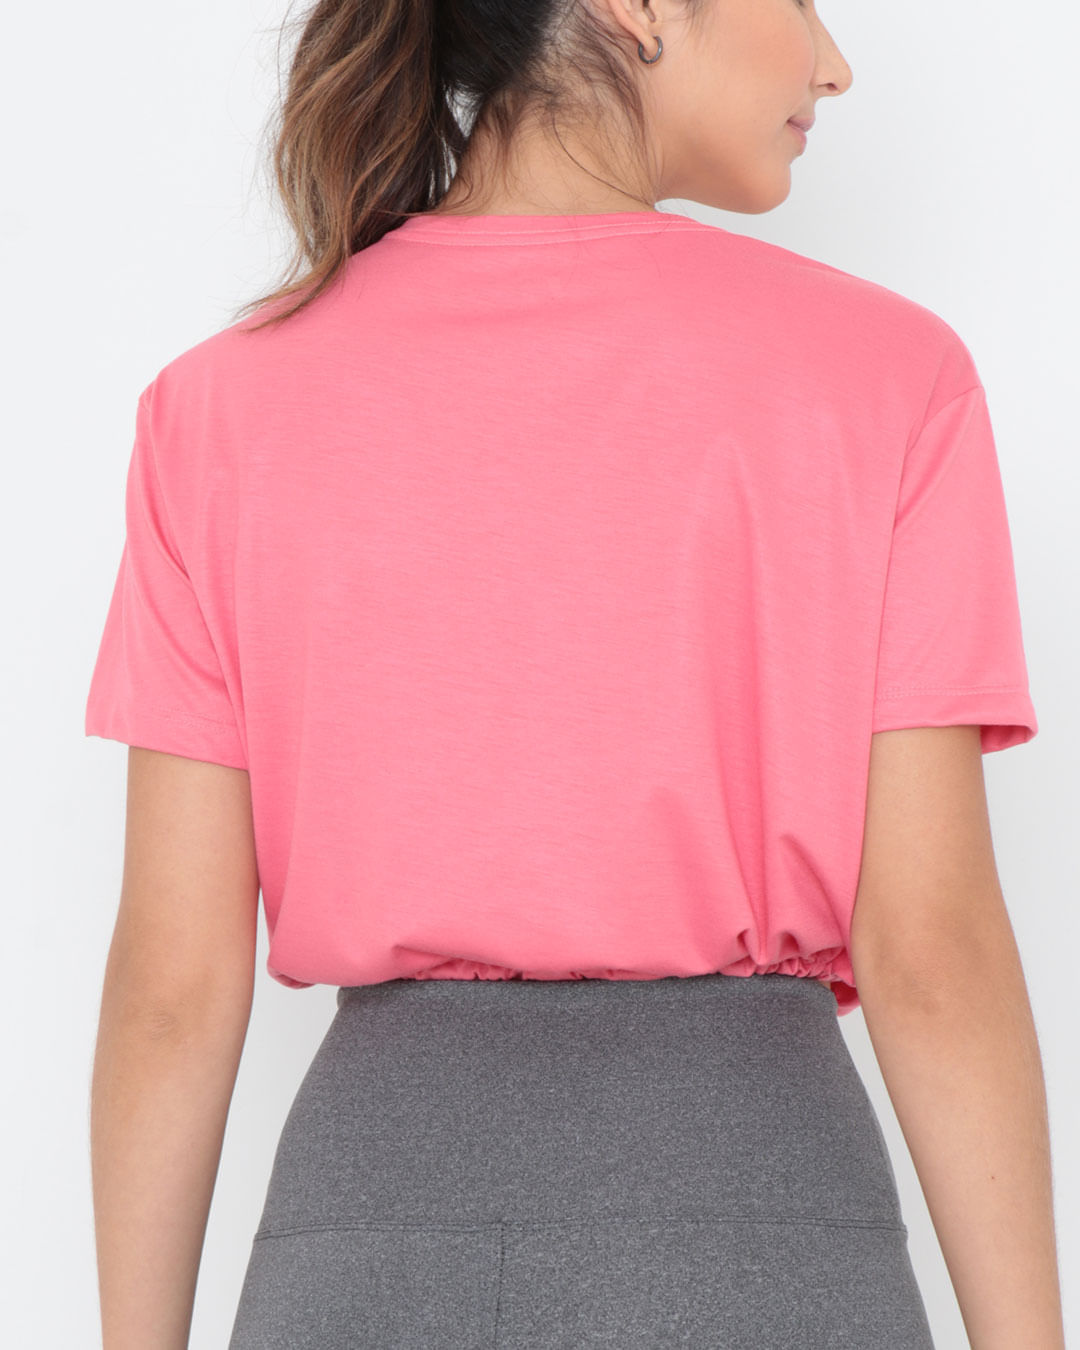 Blusa-Fitness-Cropped-Amarracao-Rosa